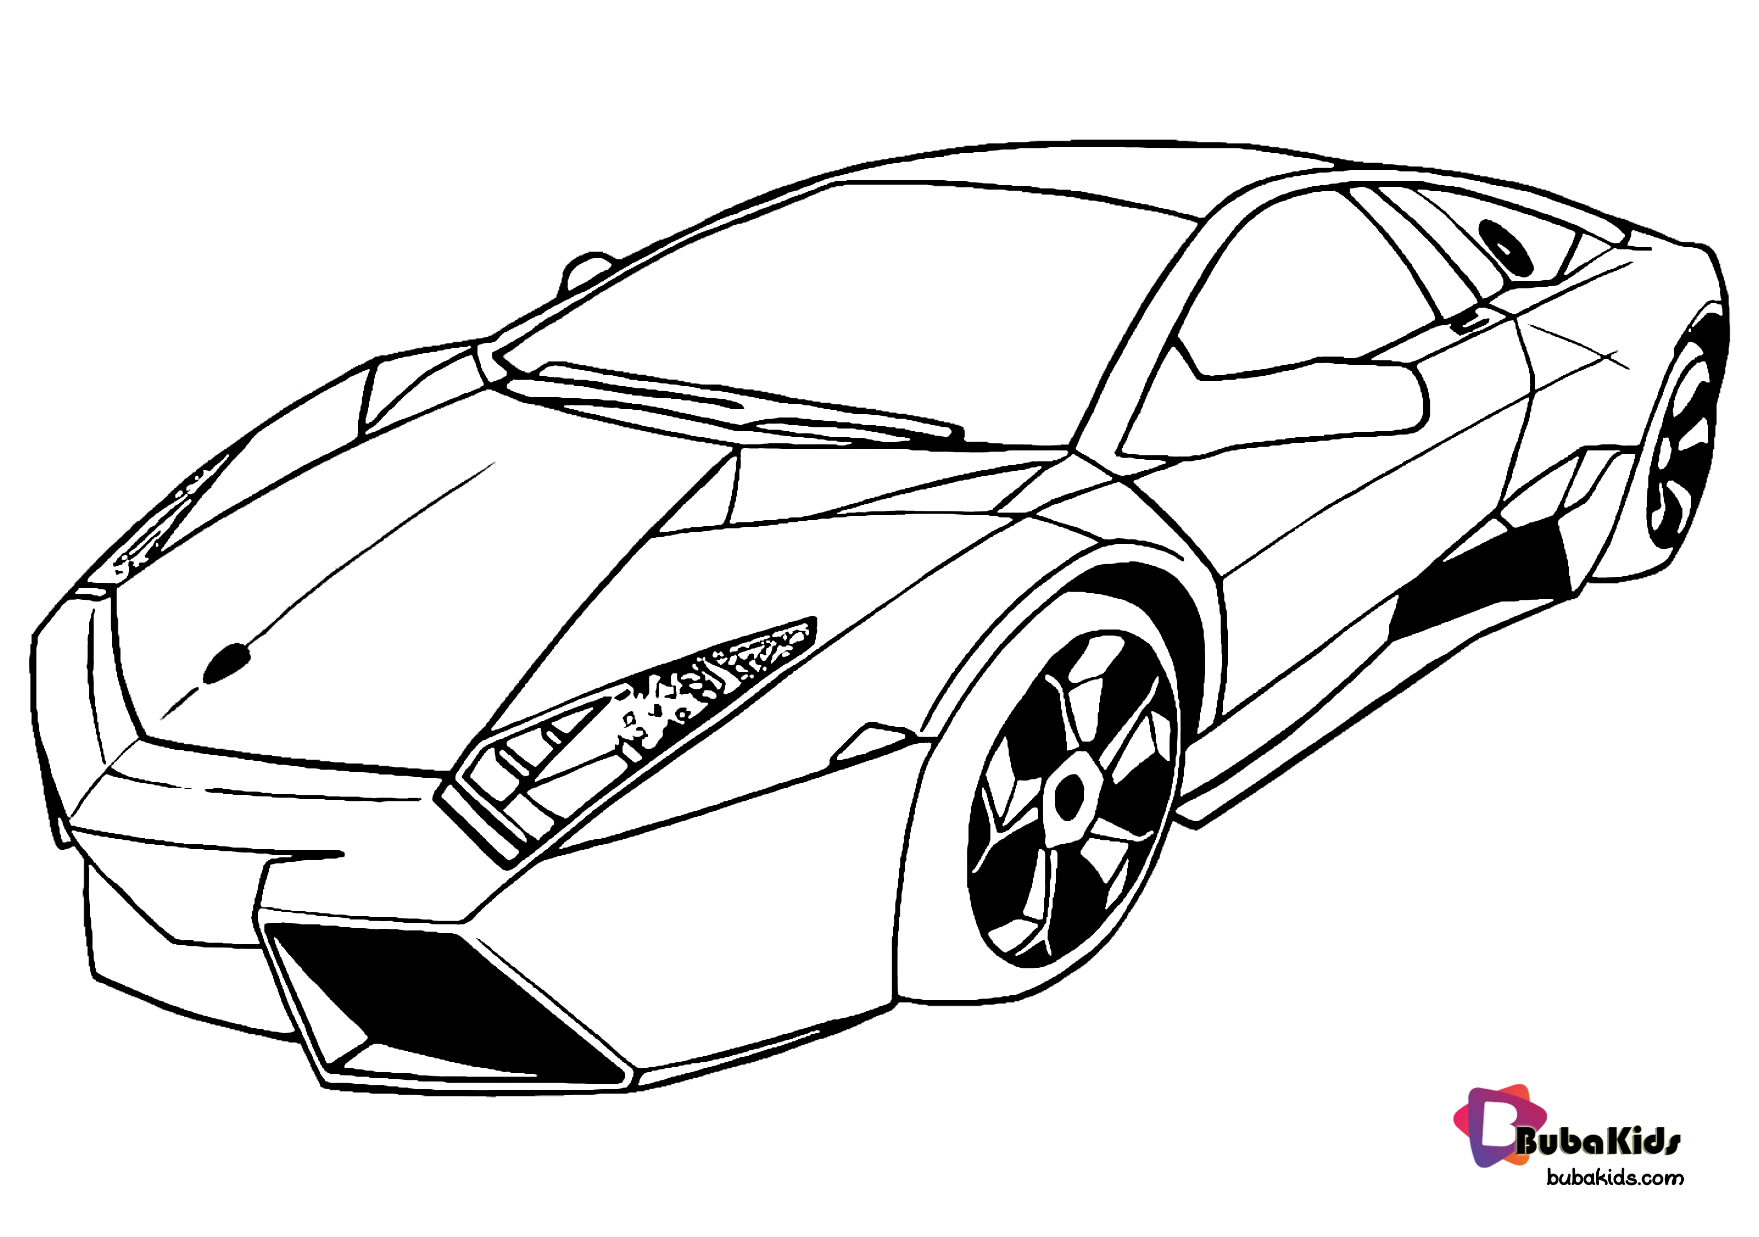 Free Download And Printable Super Car Coloring Page In 2020 | Cars